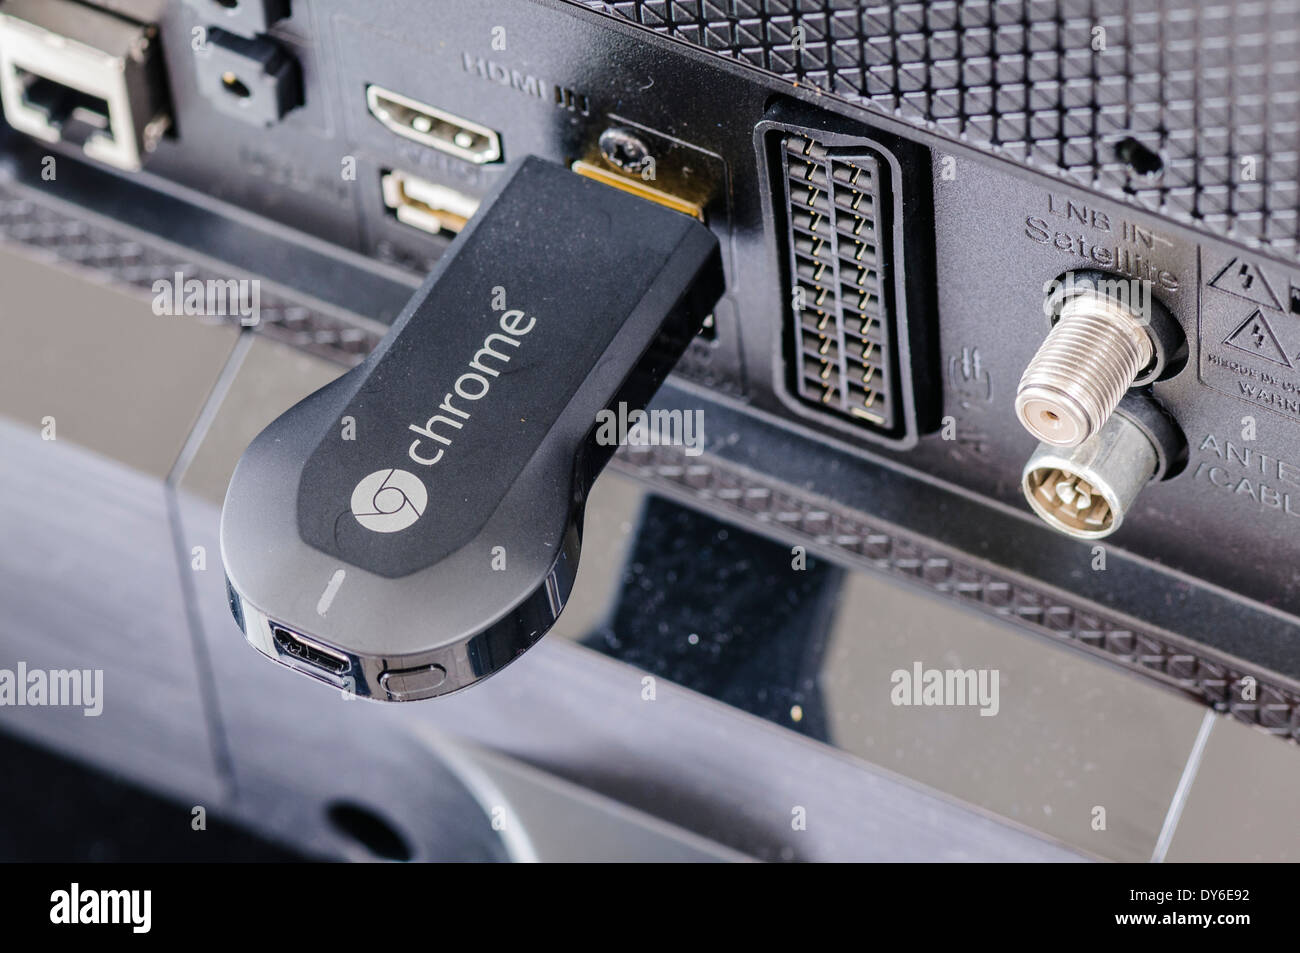 Google Chromecast TV streaming device plugged into the HDMI port of a  television Stock Photo - Alamy